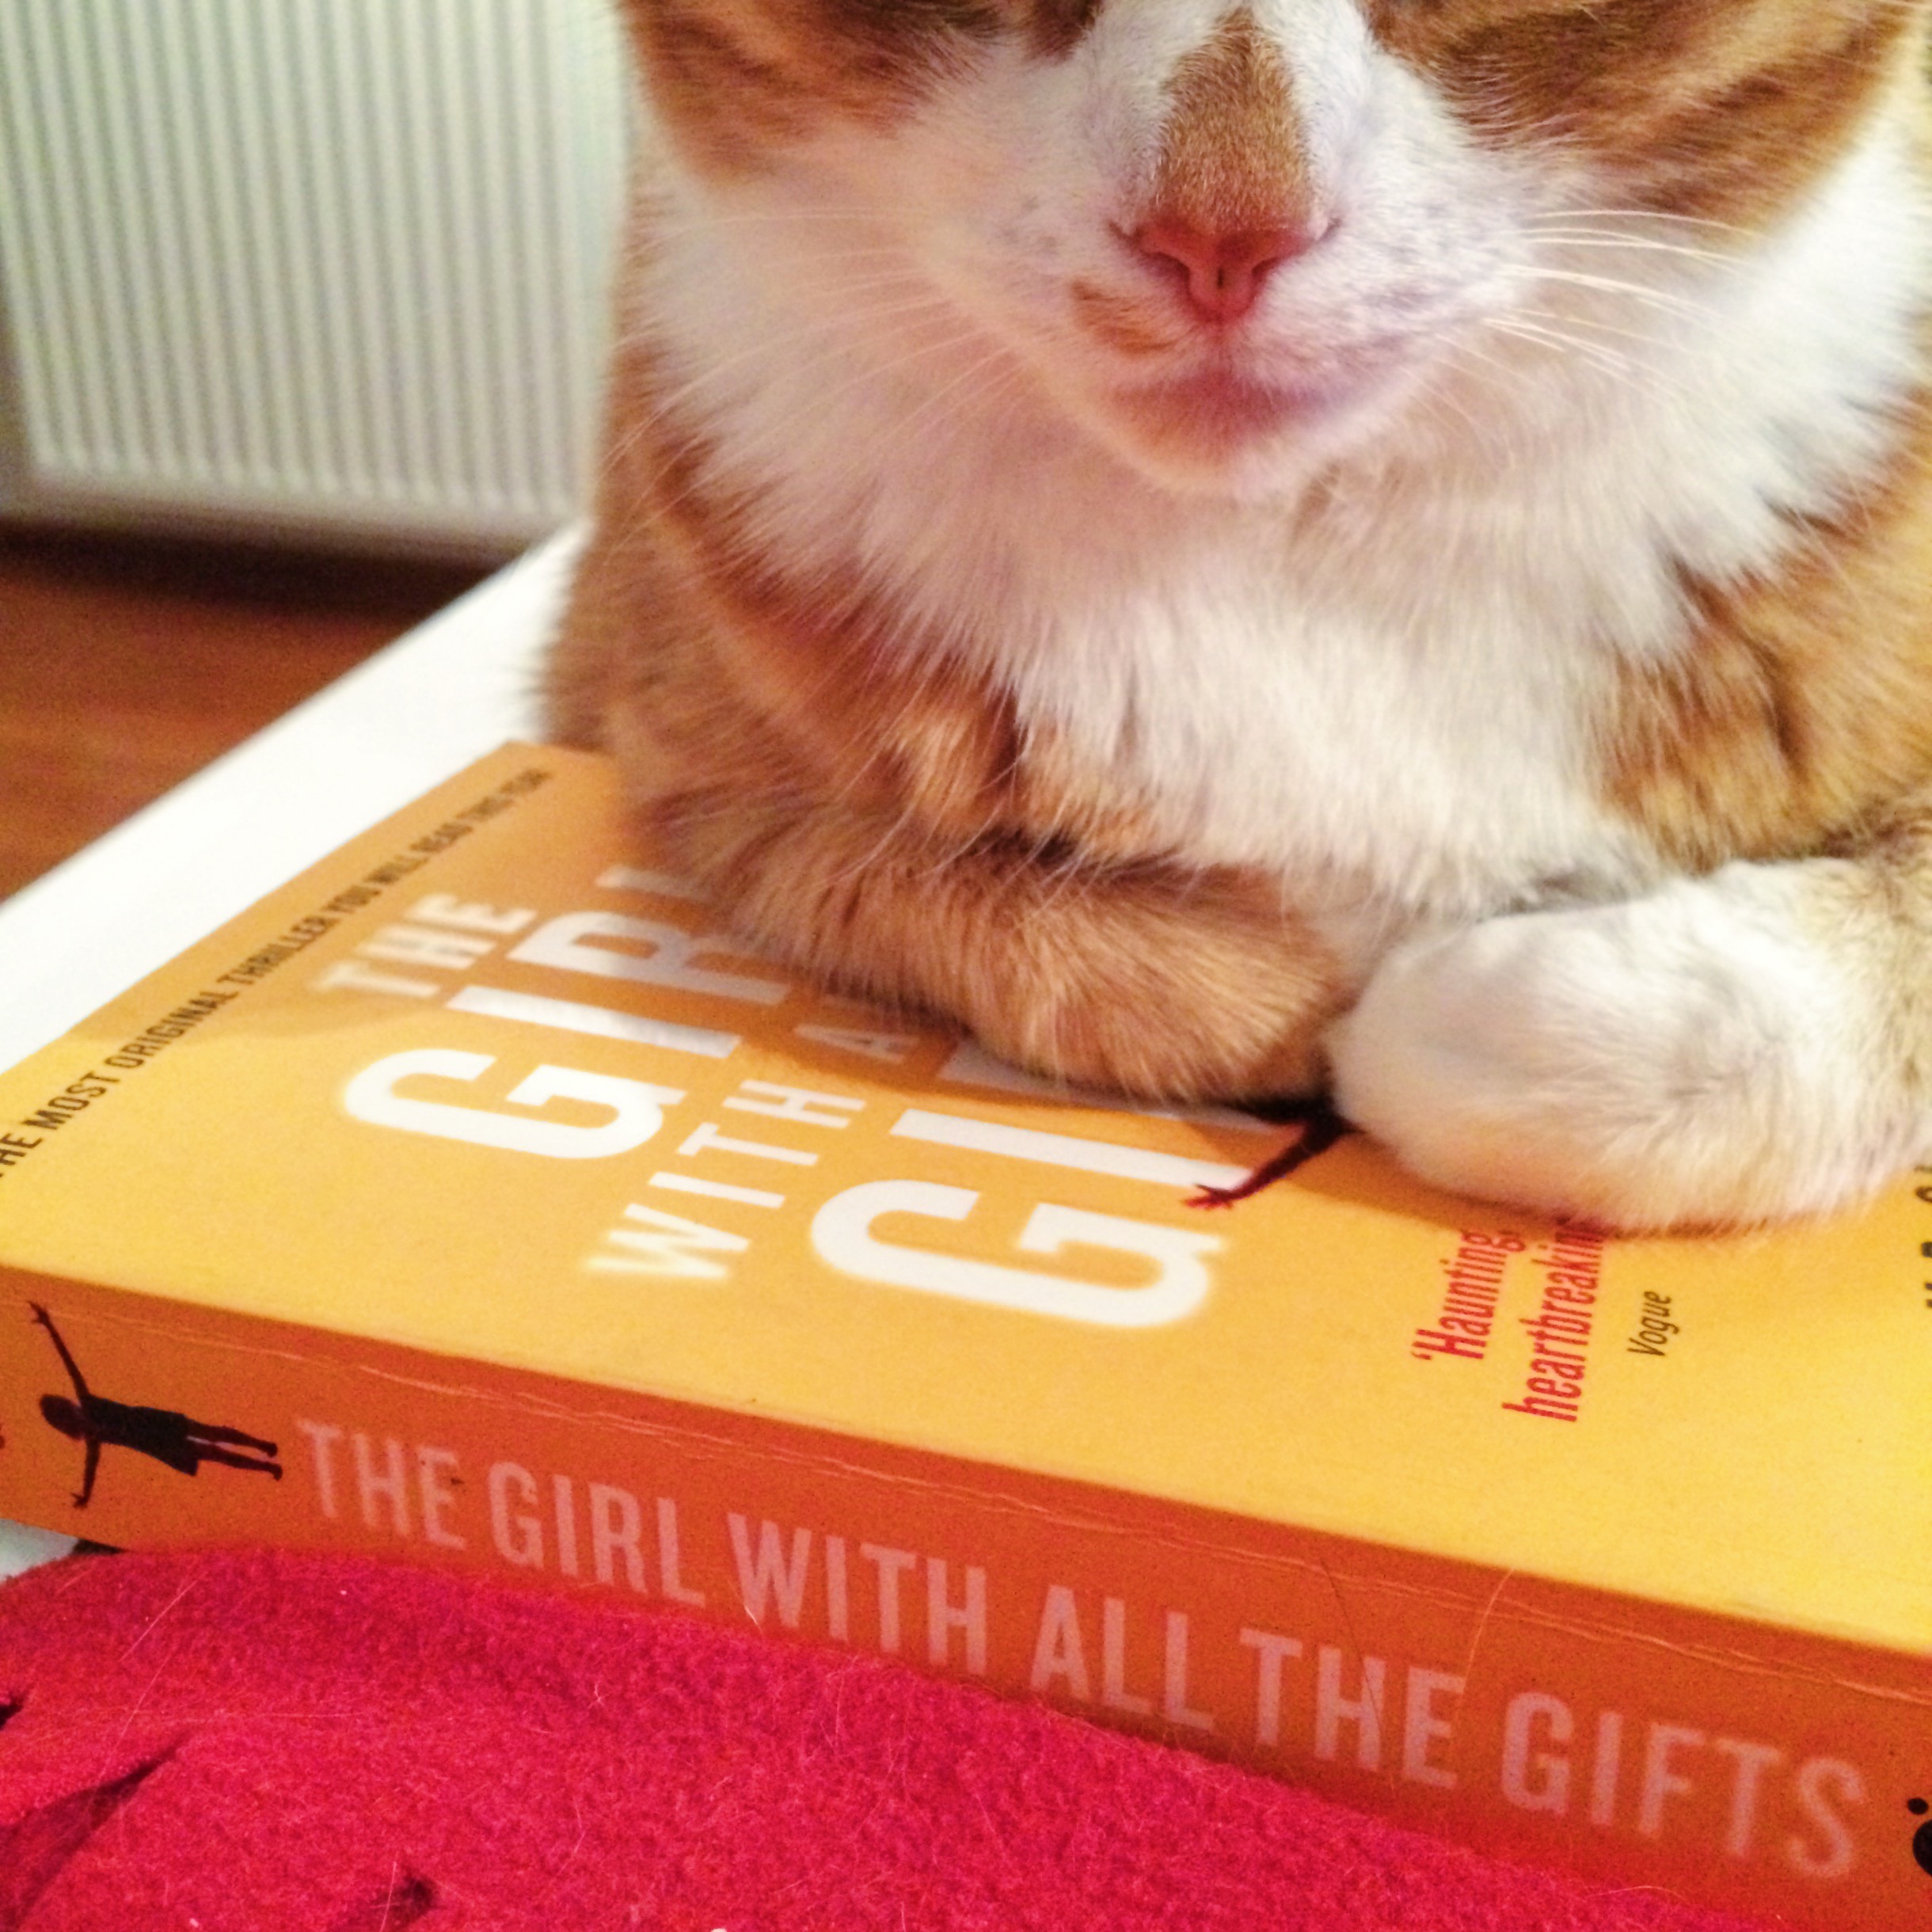 Milo likes to sleep on books, MR Carey's The Girl with all the Gifts pictured here